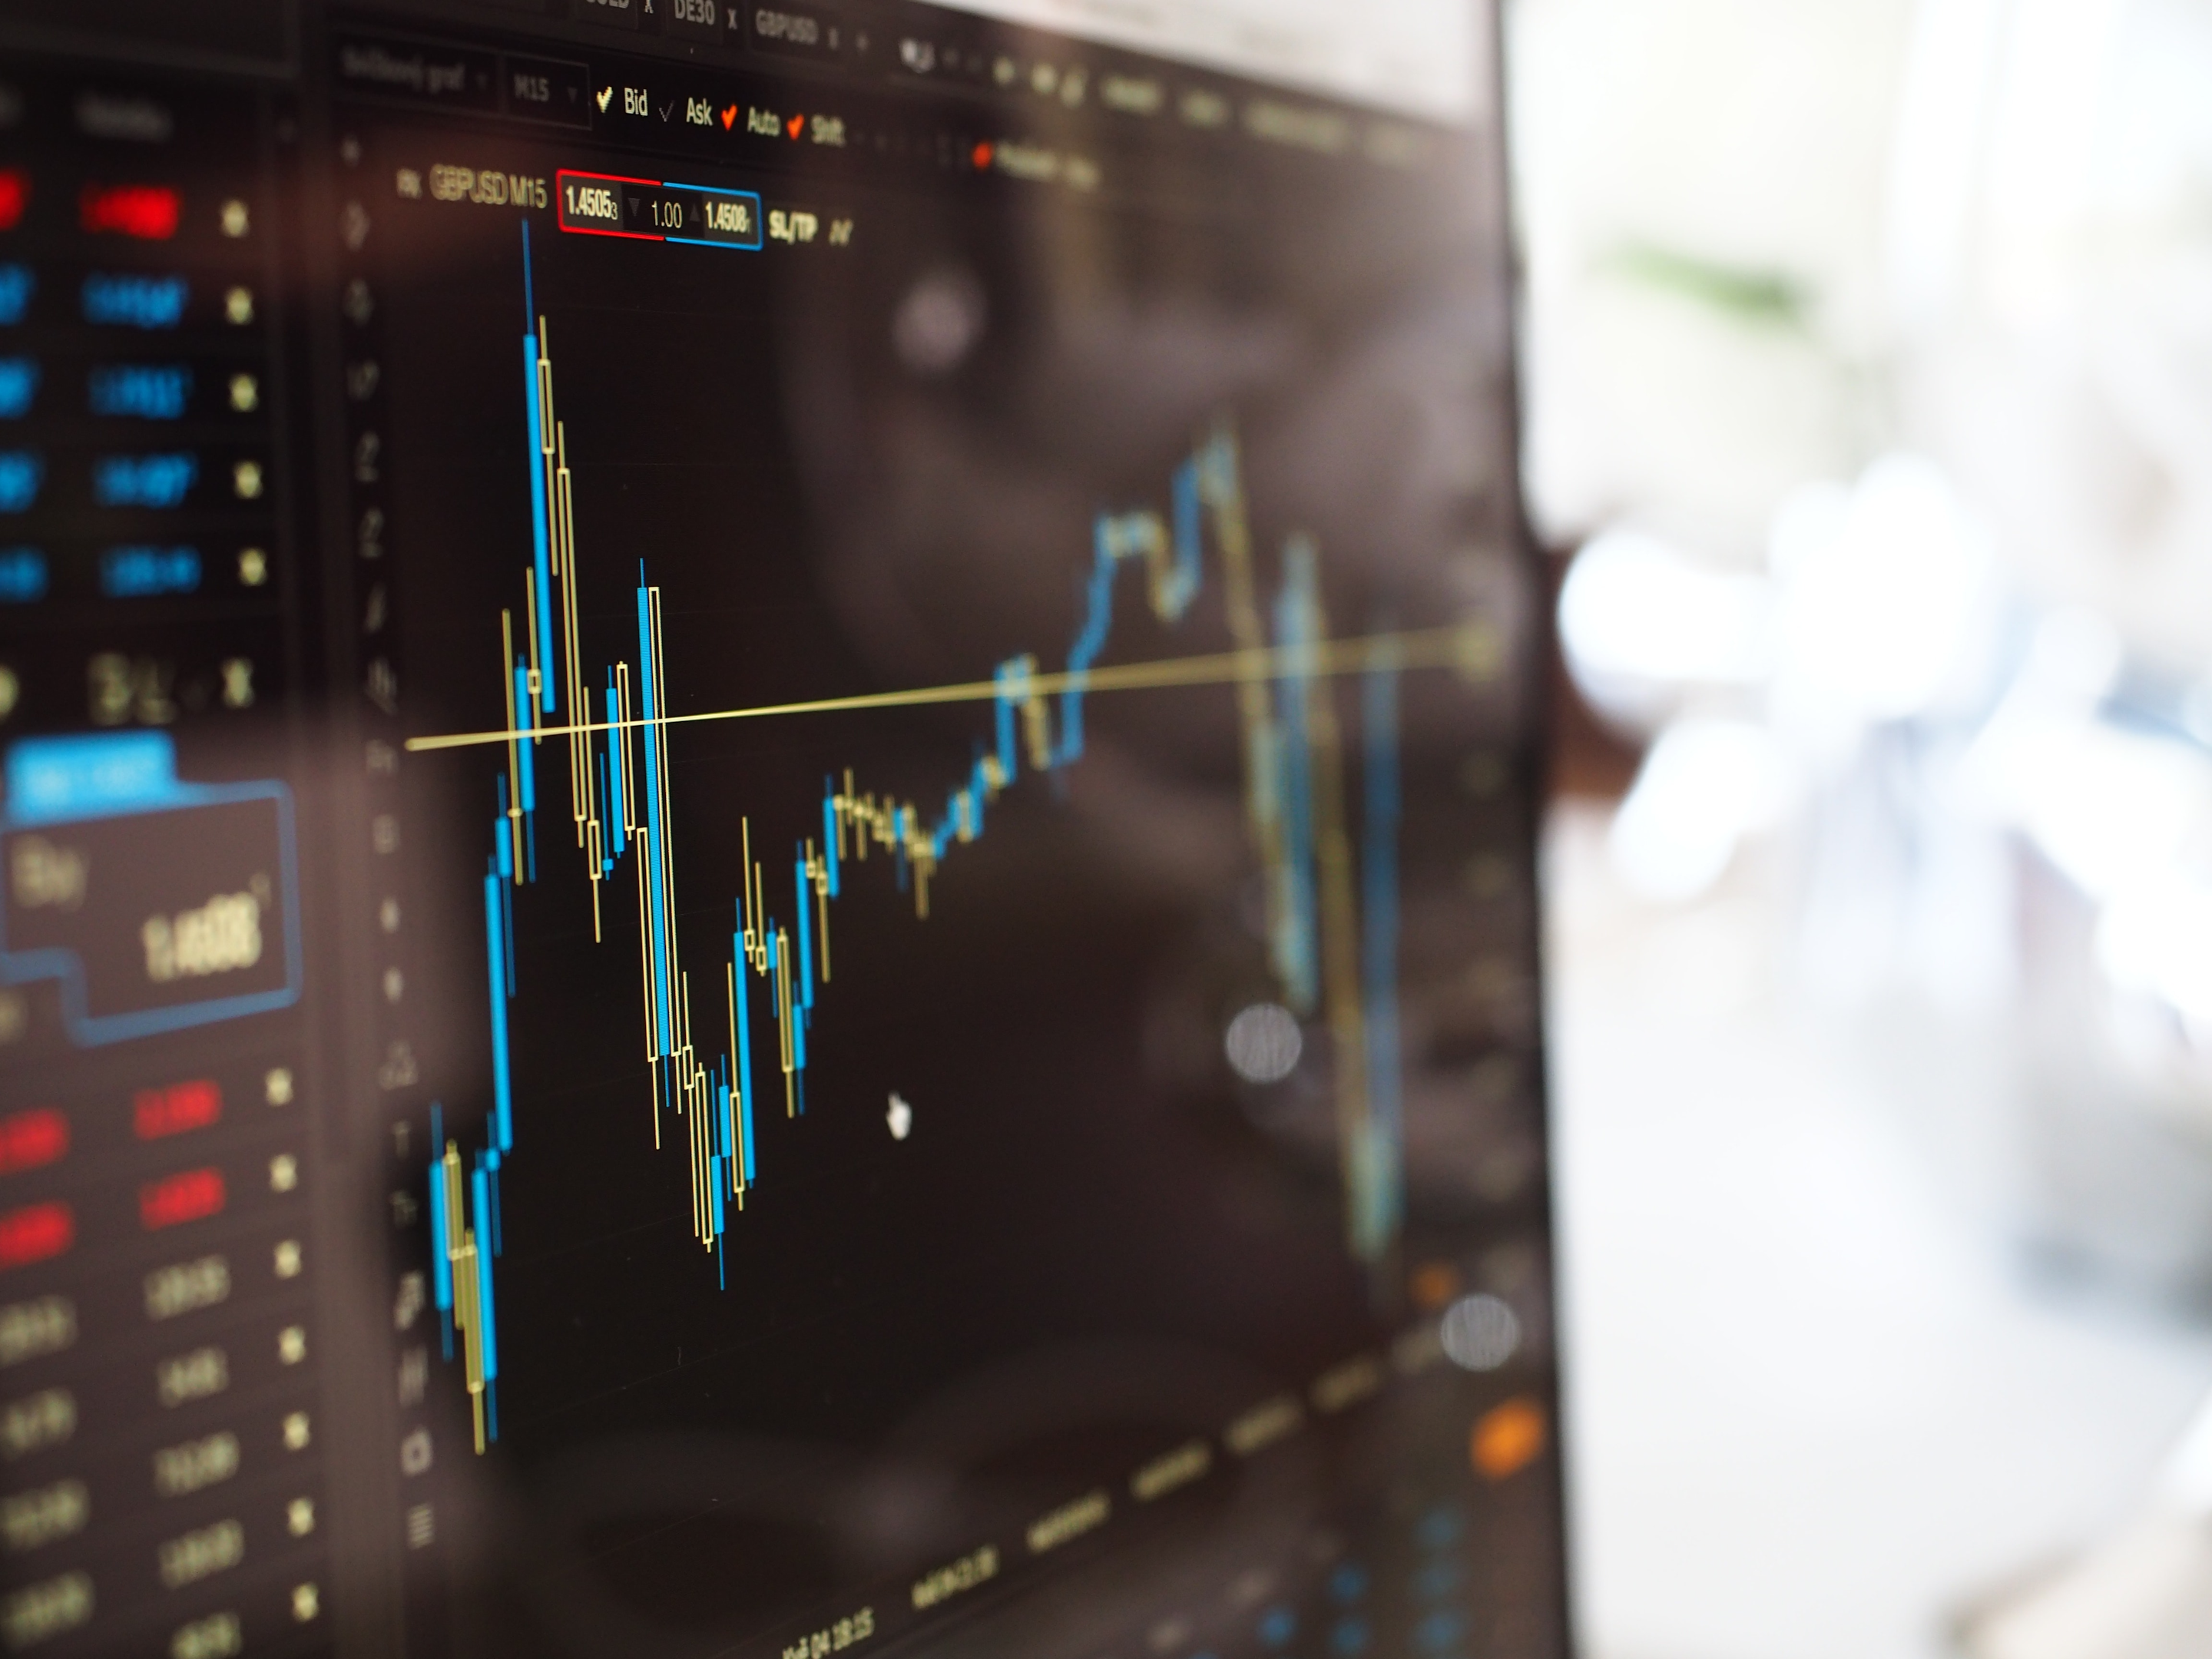 The volatility of the intraday market has caused the big swings observed in the stock market | Photo by energepic.com from Pexels